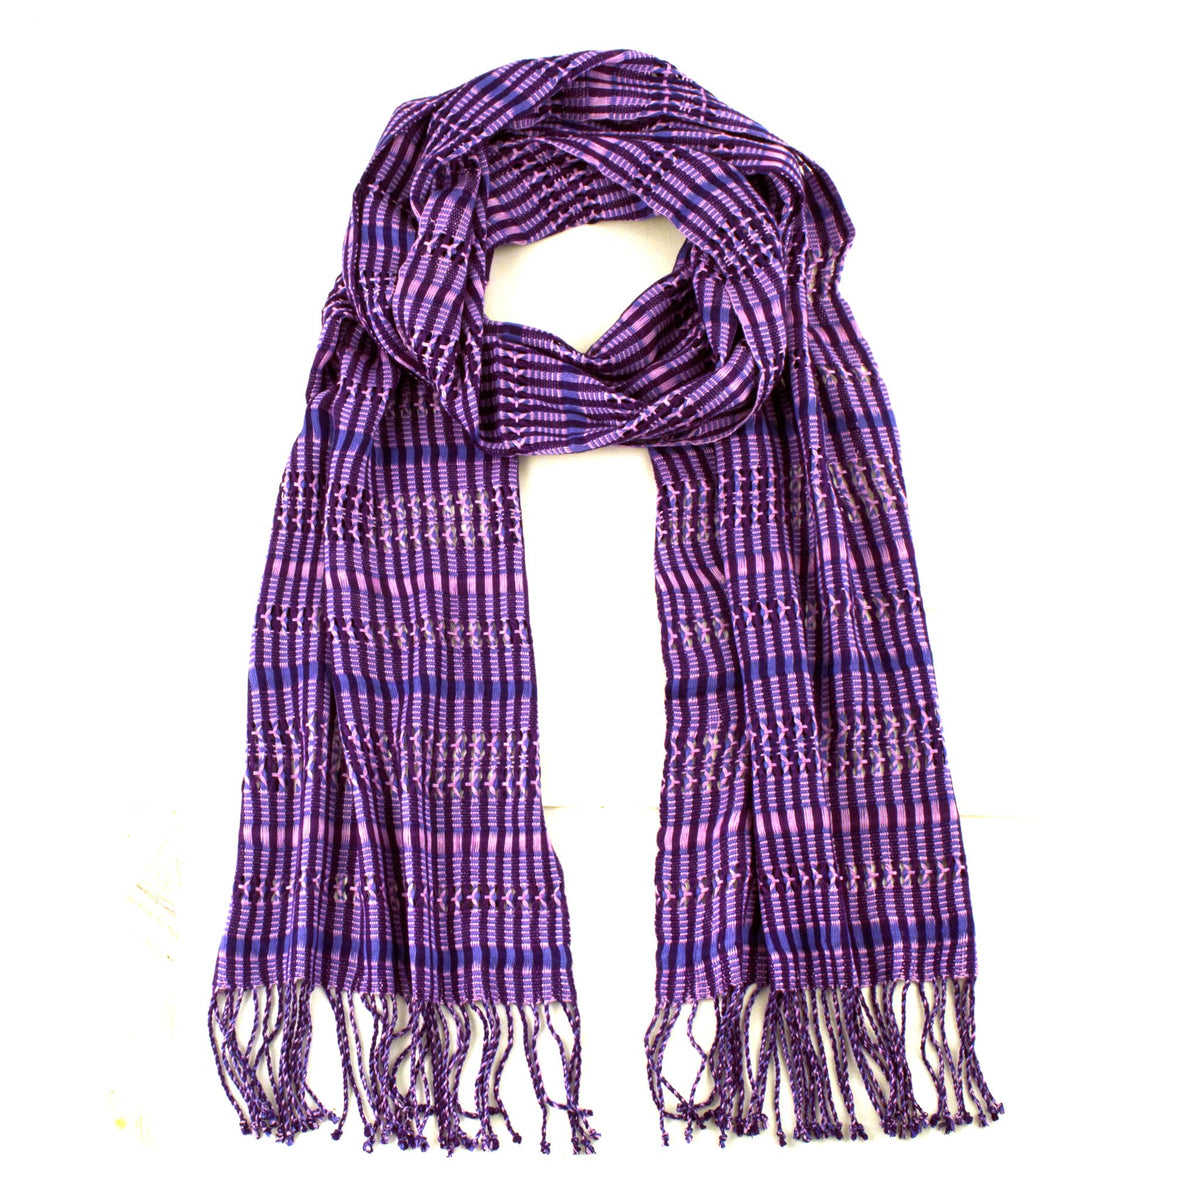 Linda Scarf in Violet, woven from rayon threads in purple and navy tones, with twisted fringe. The scarf is laid flat, wrapped with a circle on white background.